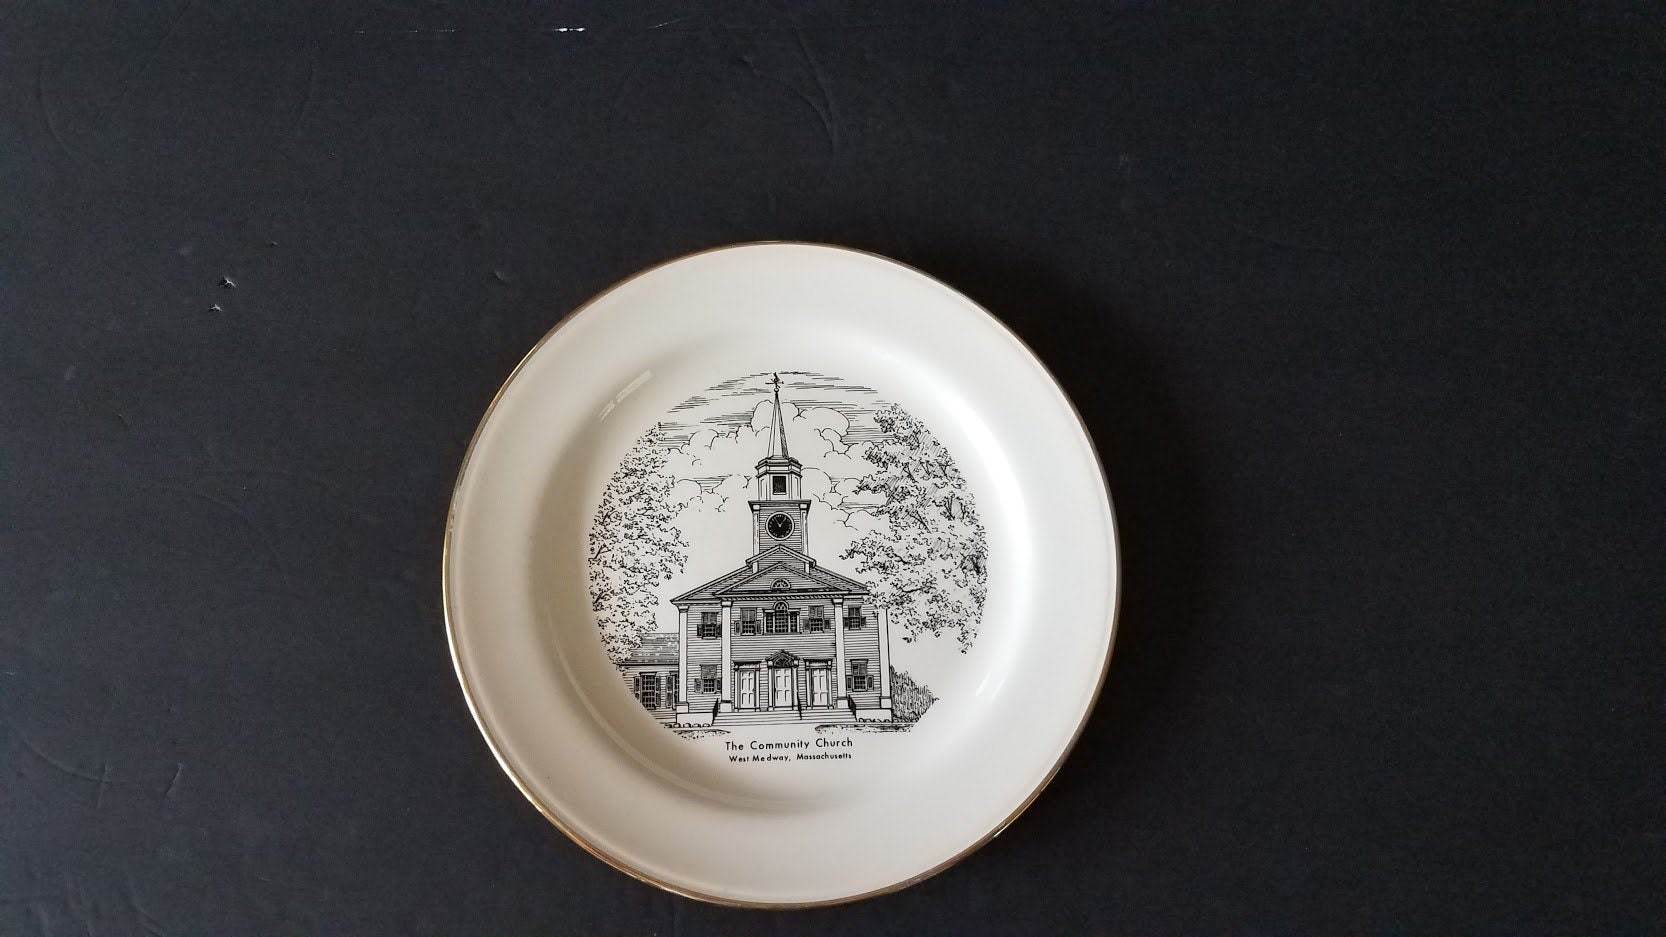 The Community Church West Medway, Massachusetts Plate Made in 1959 - Etsy